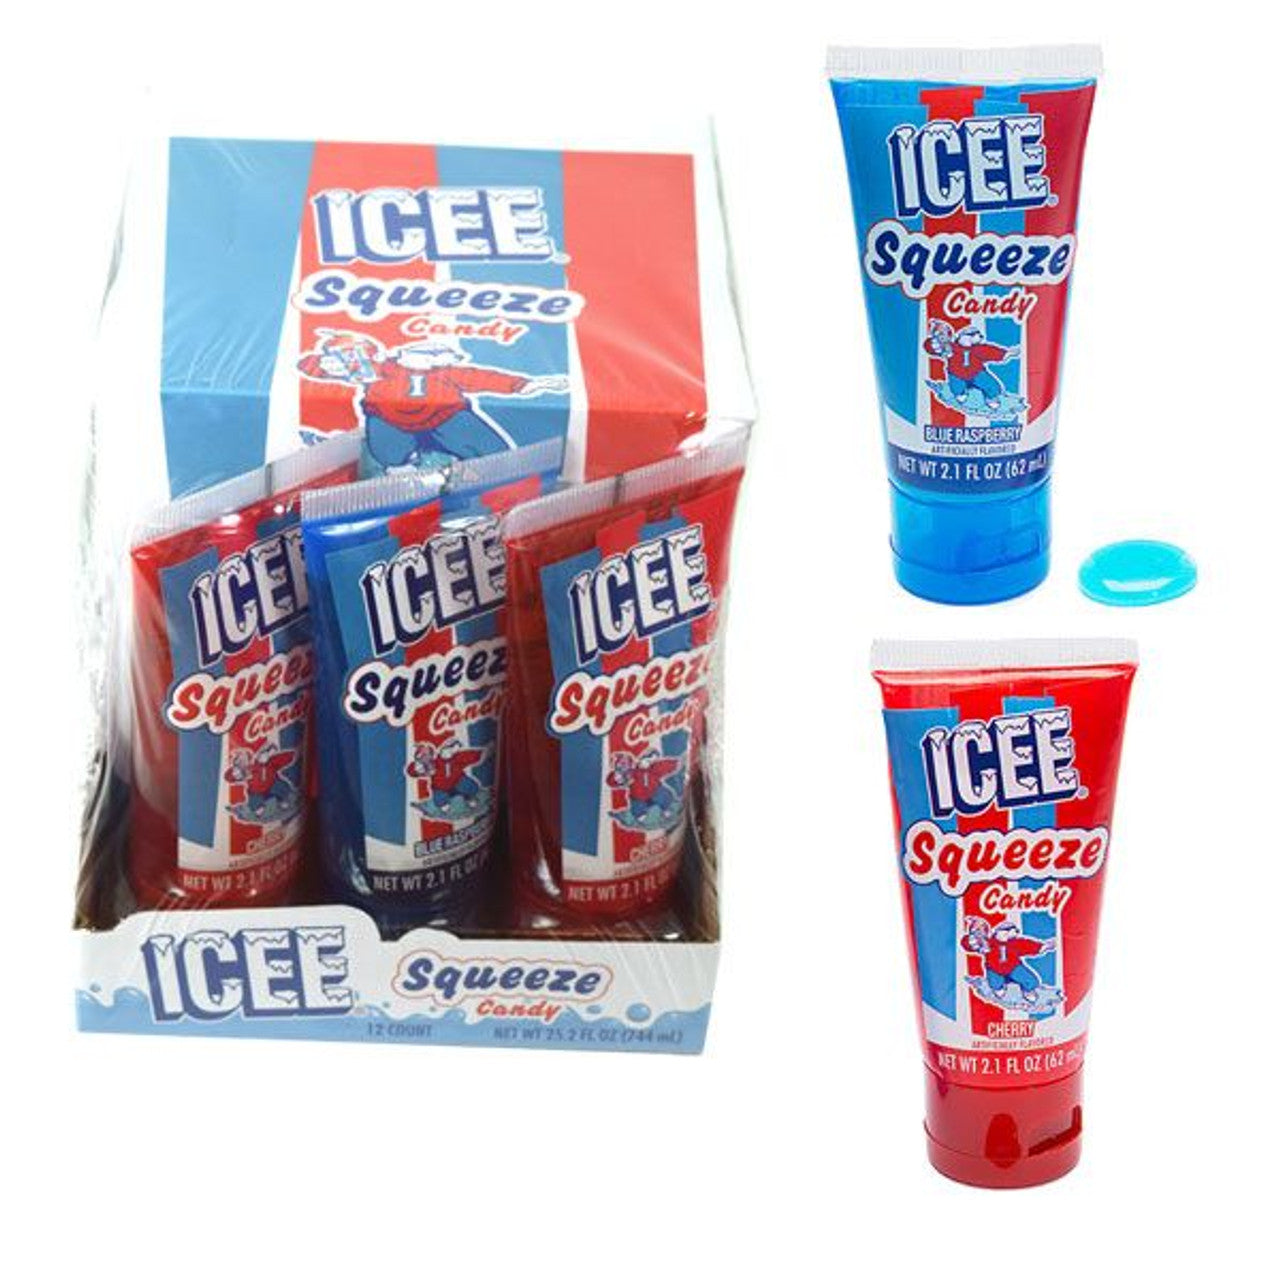 Icee Squeeze Candy Snack Hut 6608